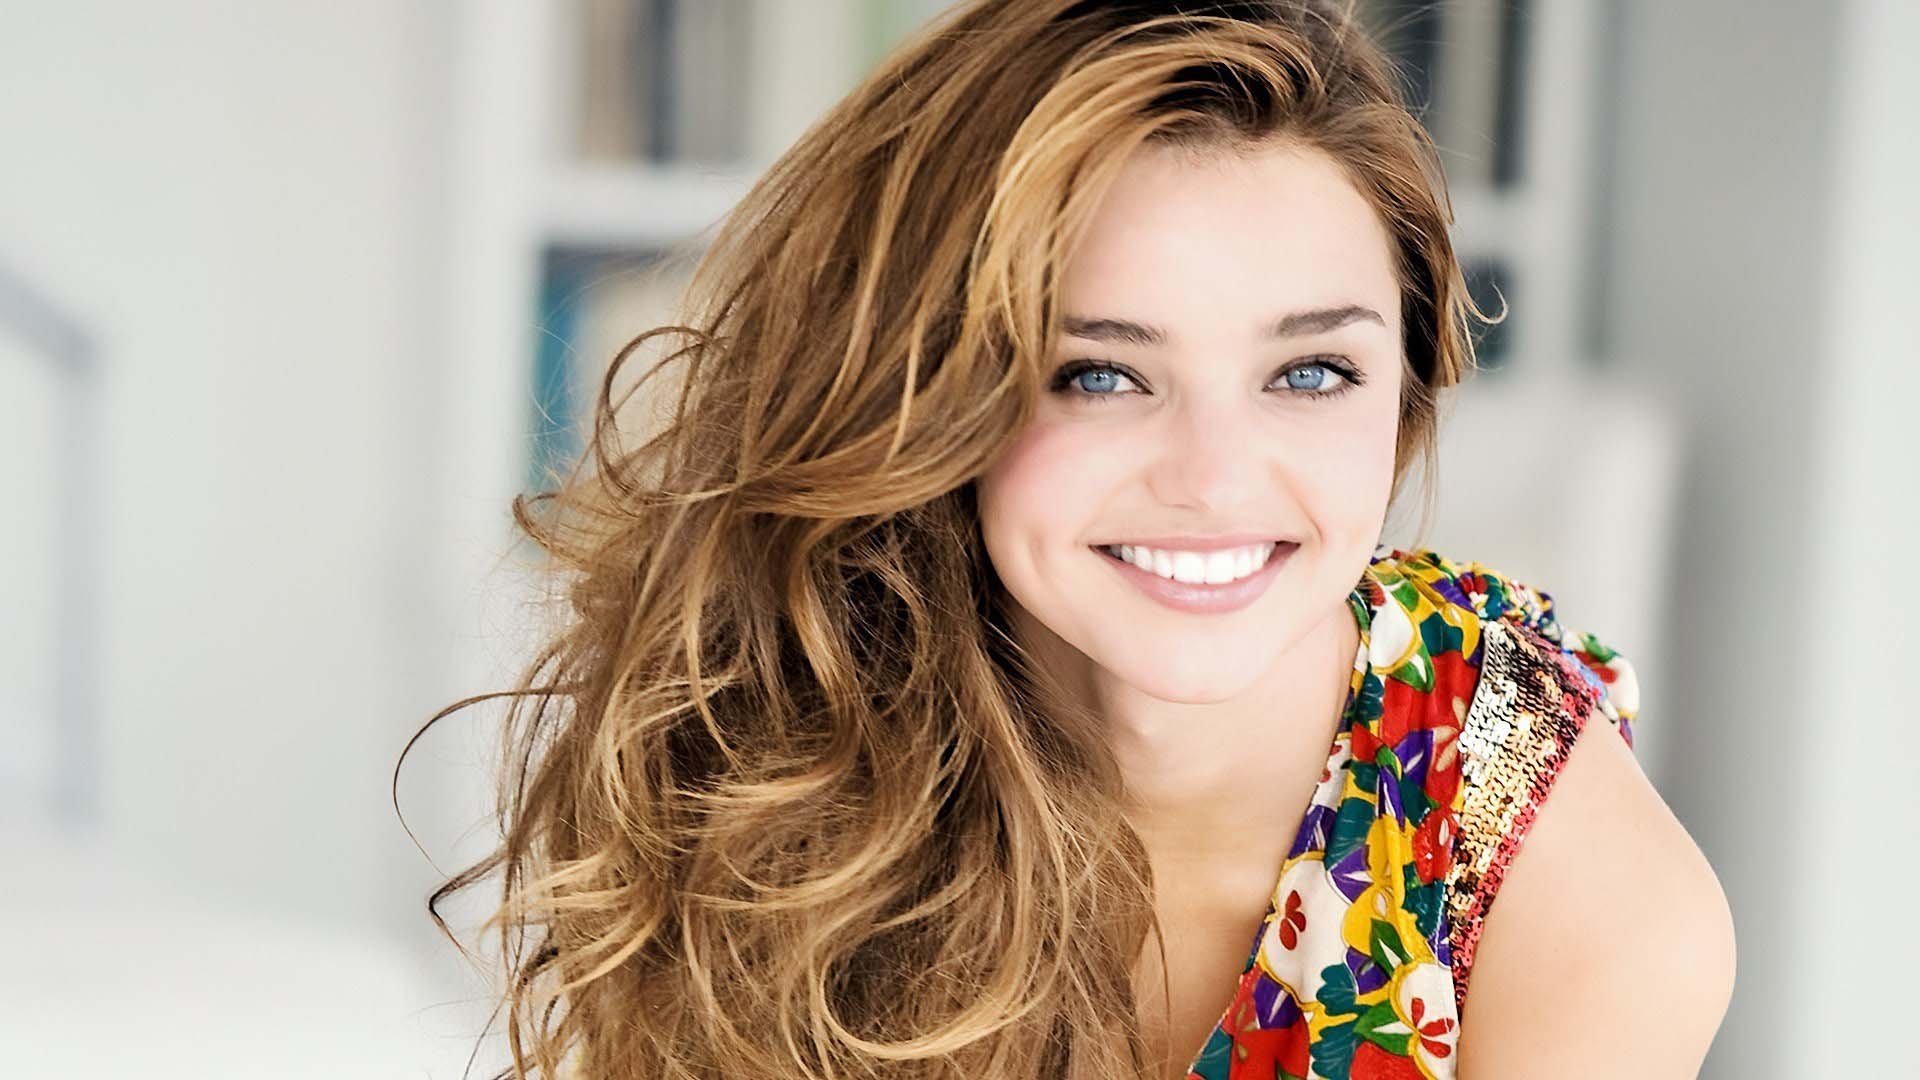 beautiful smile wallpapers,hair,face,facial expression,eyebrow,skin